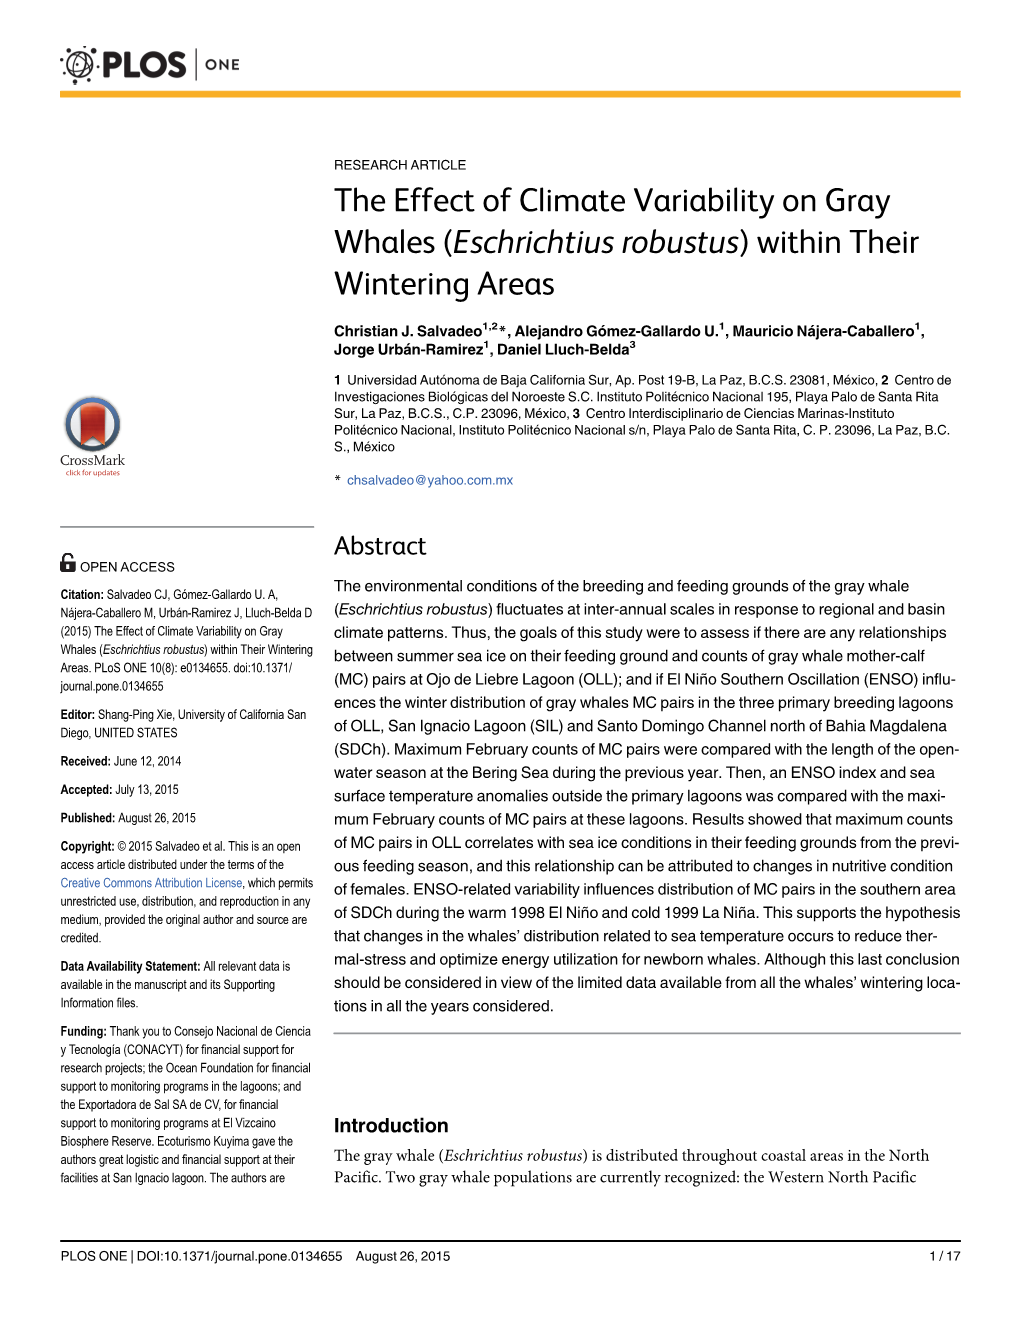 The Effect of Climate Variability on Gray Whales (Eschrichtius Robustus) Within Their Wintering Areas